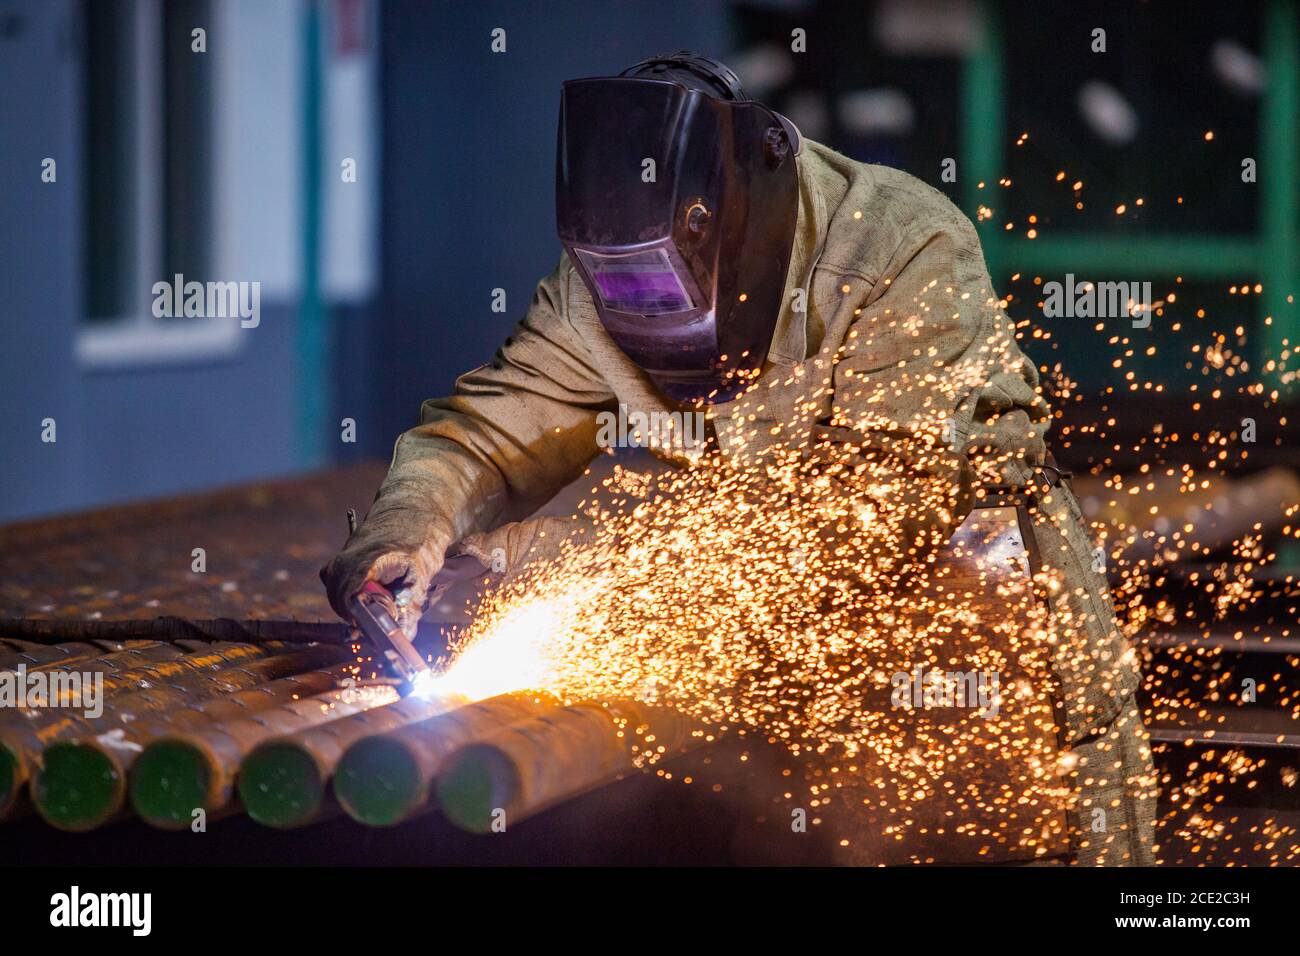 Welder in work in factory. Welding steel pipes on manufacturing (producing) plant. Sparks and smoke on dark background. Stock Photo